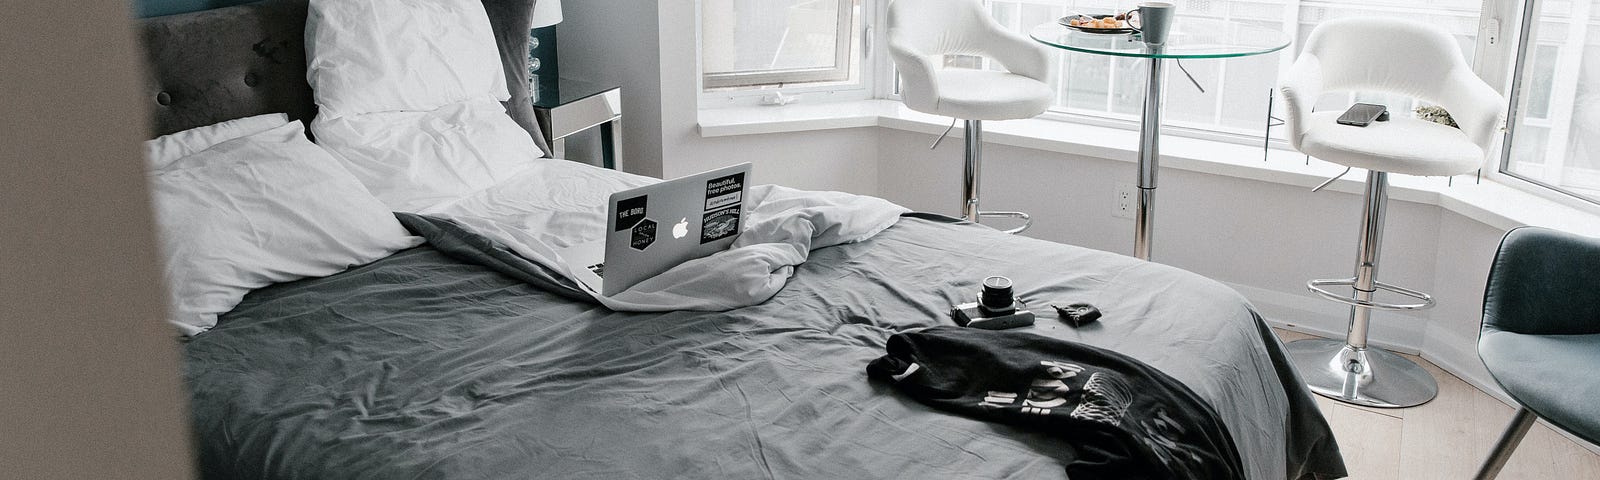 Hotel room with laptop in unmade bed and breakfast on table